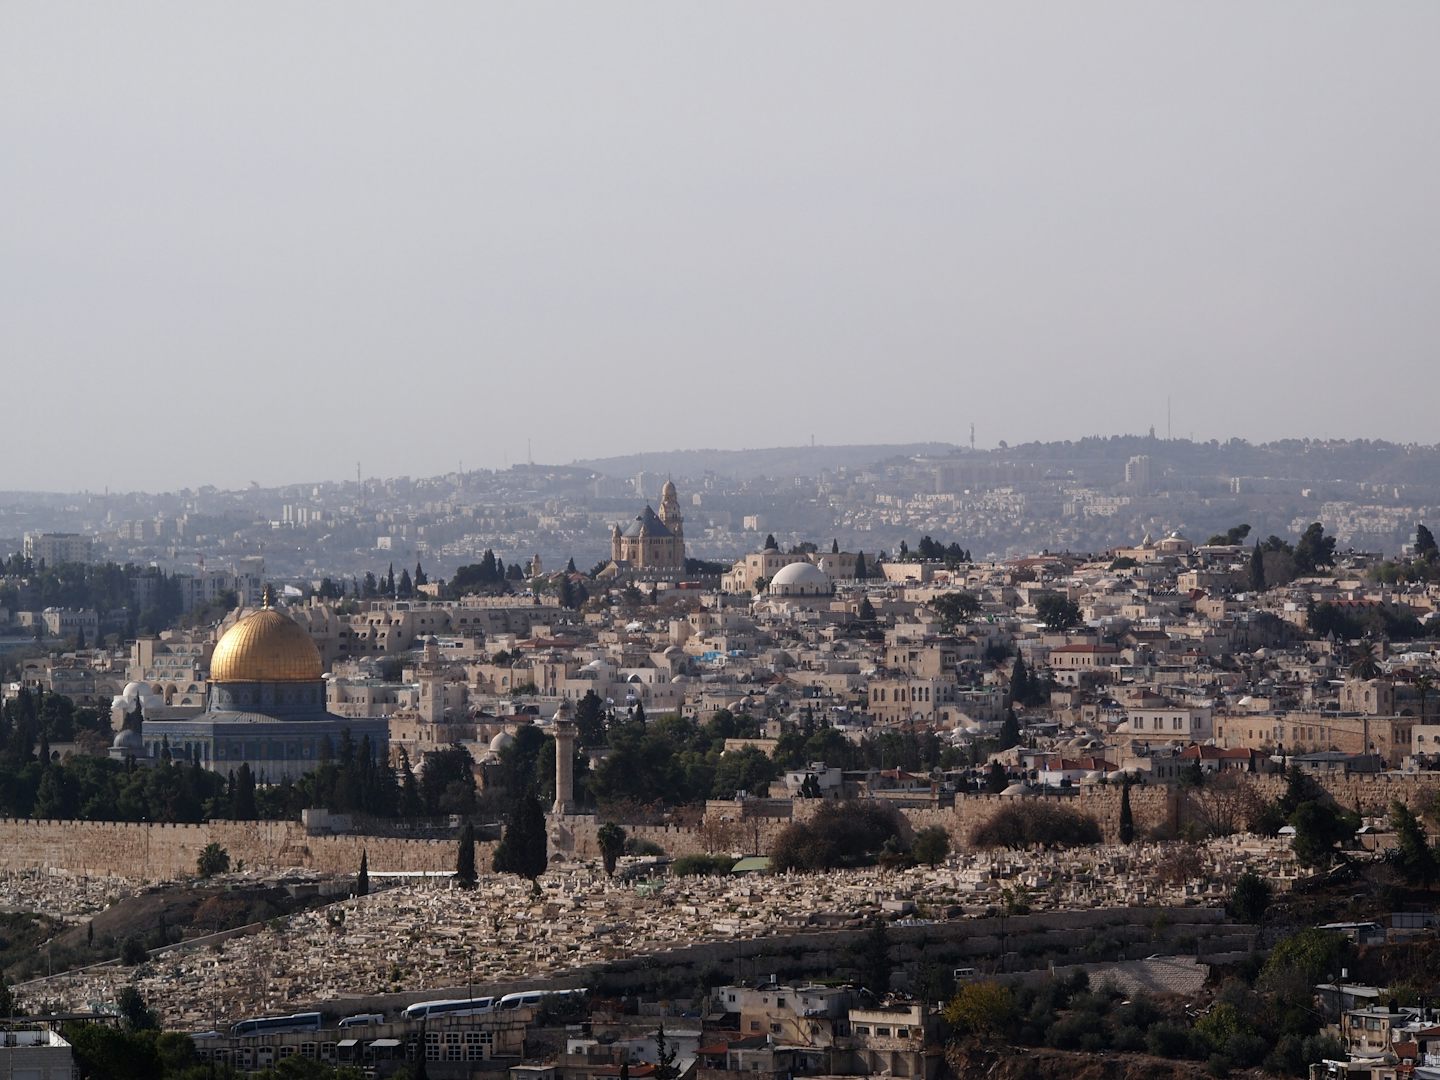 The Holy Land from the Mount of Olives